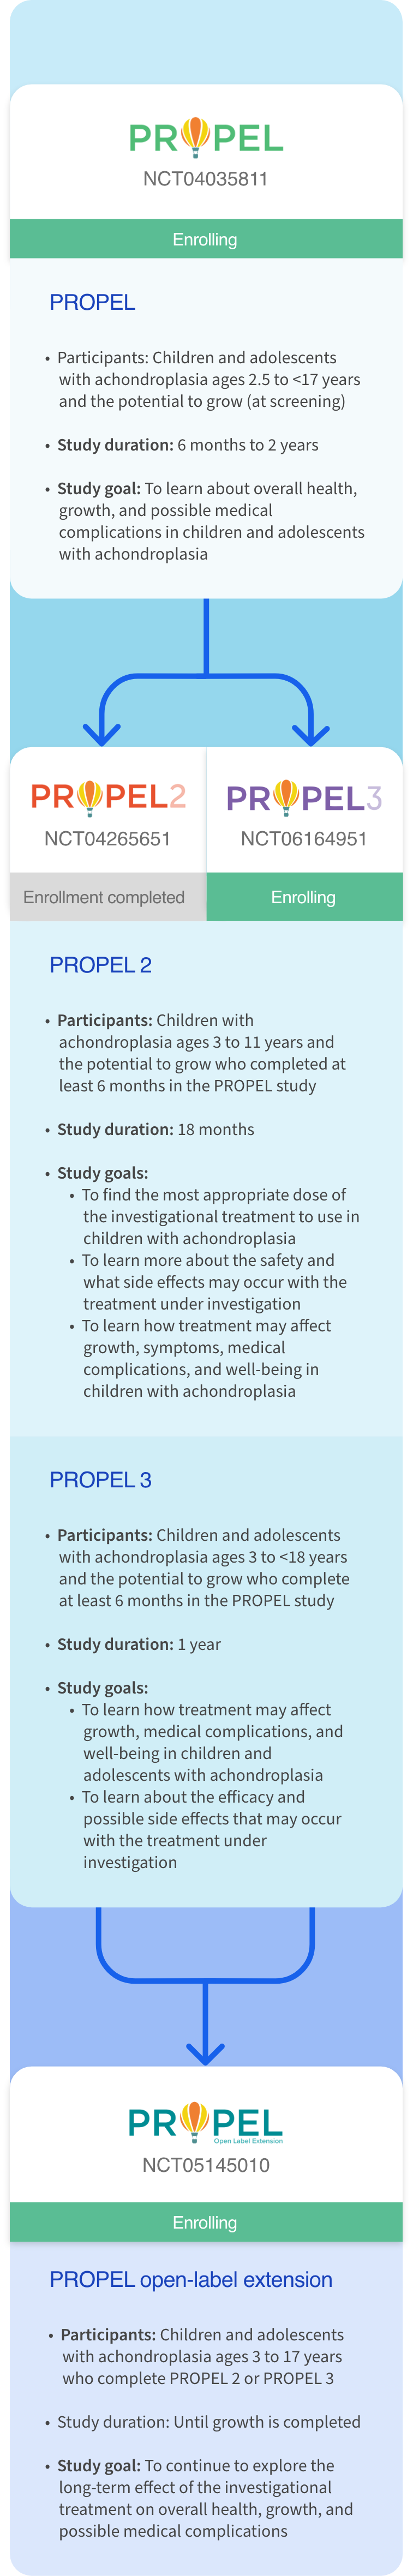 Detailed flowchart and summary of the PROPEL clinical study series for achondroplasia. The series starts with PROPEL, NCT0435811, which is currently enrolling participants aged 2.5 to <17 years. PROPEL has a study duration of 6 months to 2 years and has a study goal to learn about overall health, growth, and potential medical complications in children and adolescents with achondroplasia. This leads into PROPEL2, NCT04265651, with enrollment completed and a study duration of 18 months. PROPEL 2 is focused on children aged 3 to 11 years, aiming to find the most appropriate dose of treatment, safety, and how treatment may affect growth, medical complications, and well-being. Parallel to this is PROPEL 3, NCT06164951, still enrolling, for children and adolescents aged 3 to <18 years, with goals to understand treatment effects on growth, medical complications, and well-being, with a study duration of 1 year. Both PROPEL 2 and PROPEL 3 funnel into PROPEL open-label extension, NCT0514510, enrolling children and adolescents aged 3 to 17 years who completed PROP2 or PROP3, with the goal to explore long-term effects of treatment on overall health, growth, and possible medical complications. The study duration for PROPEL 3 is until growth is complete.